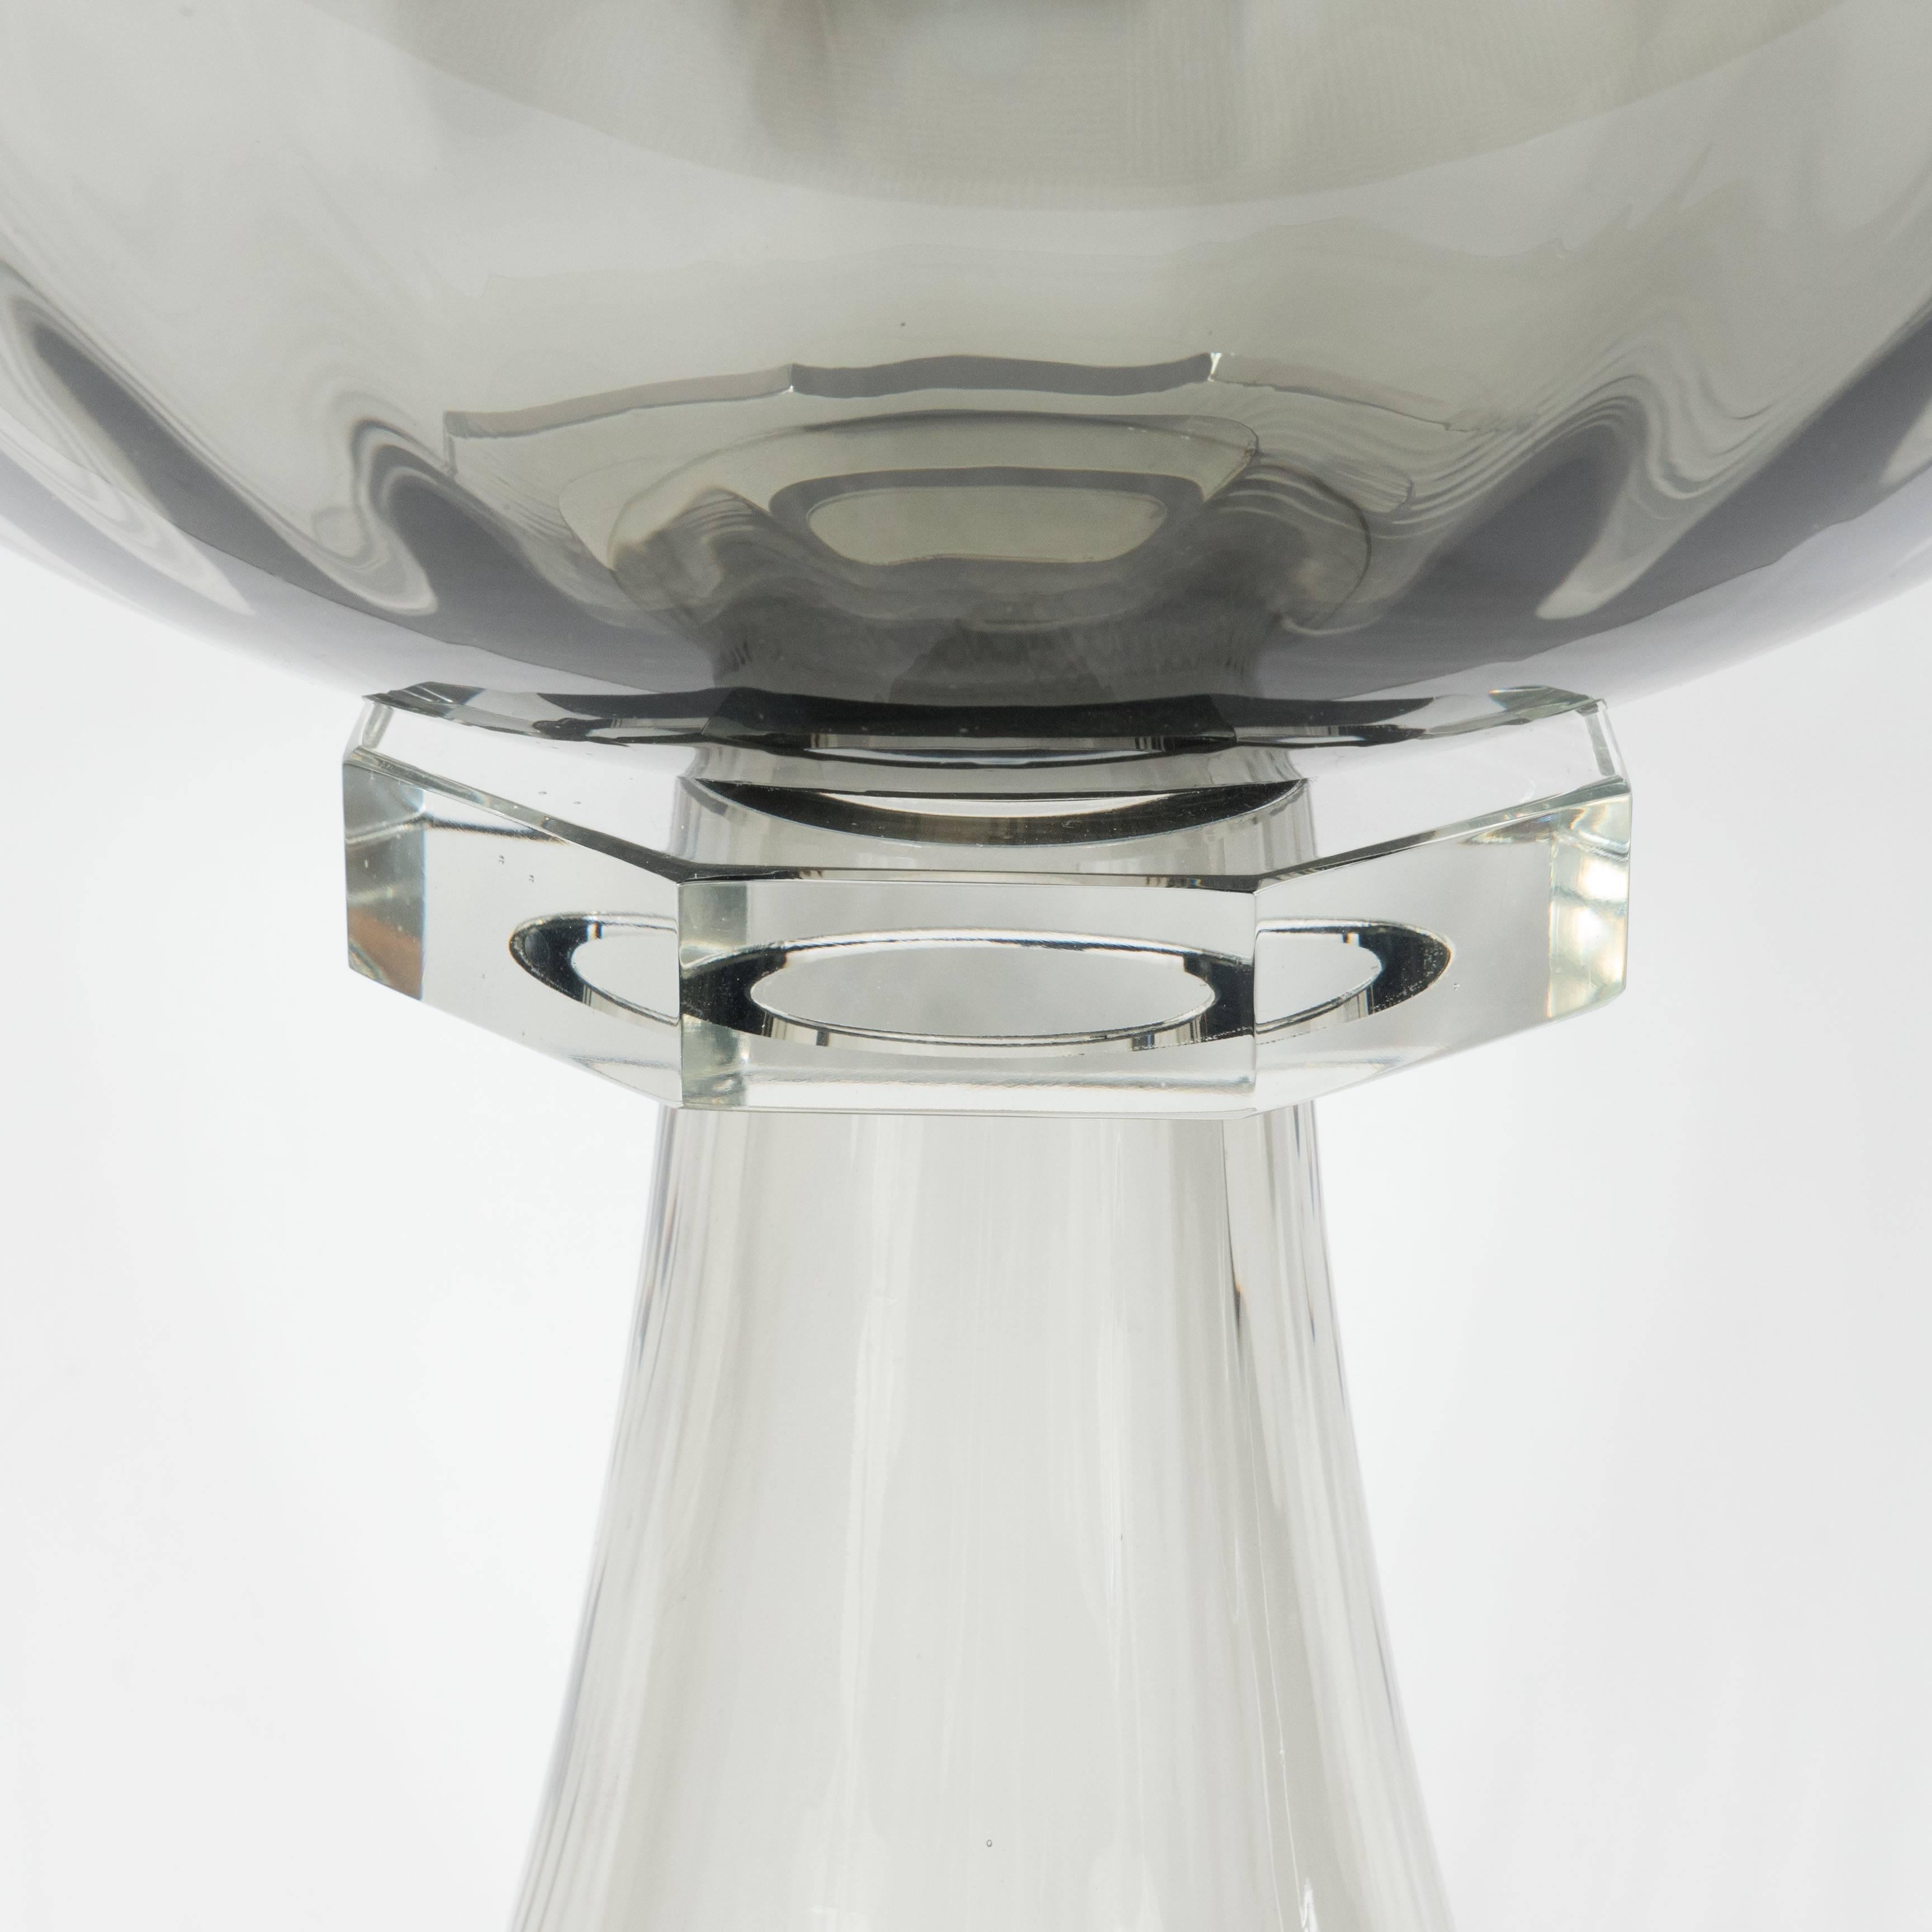 This handblown Murano glass bowl or vase features fluted footing with a tapered neck design in smoked glass. An elegant, clear octagonal glass collar supports a smoked glass bowl with fluted detail. Custom order, 6 week delivery.

Italian, 21st